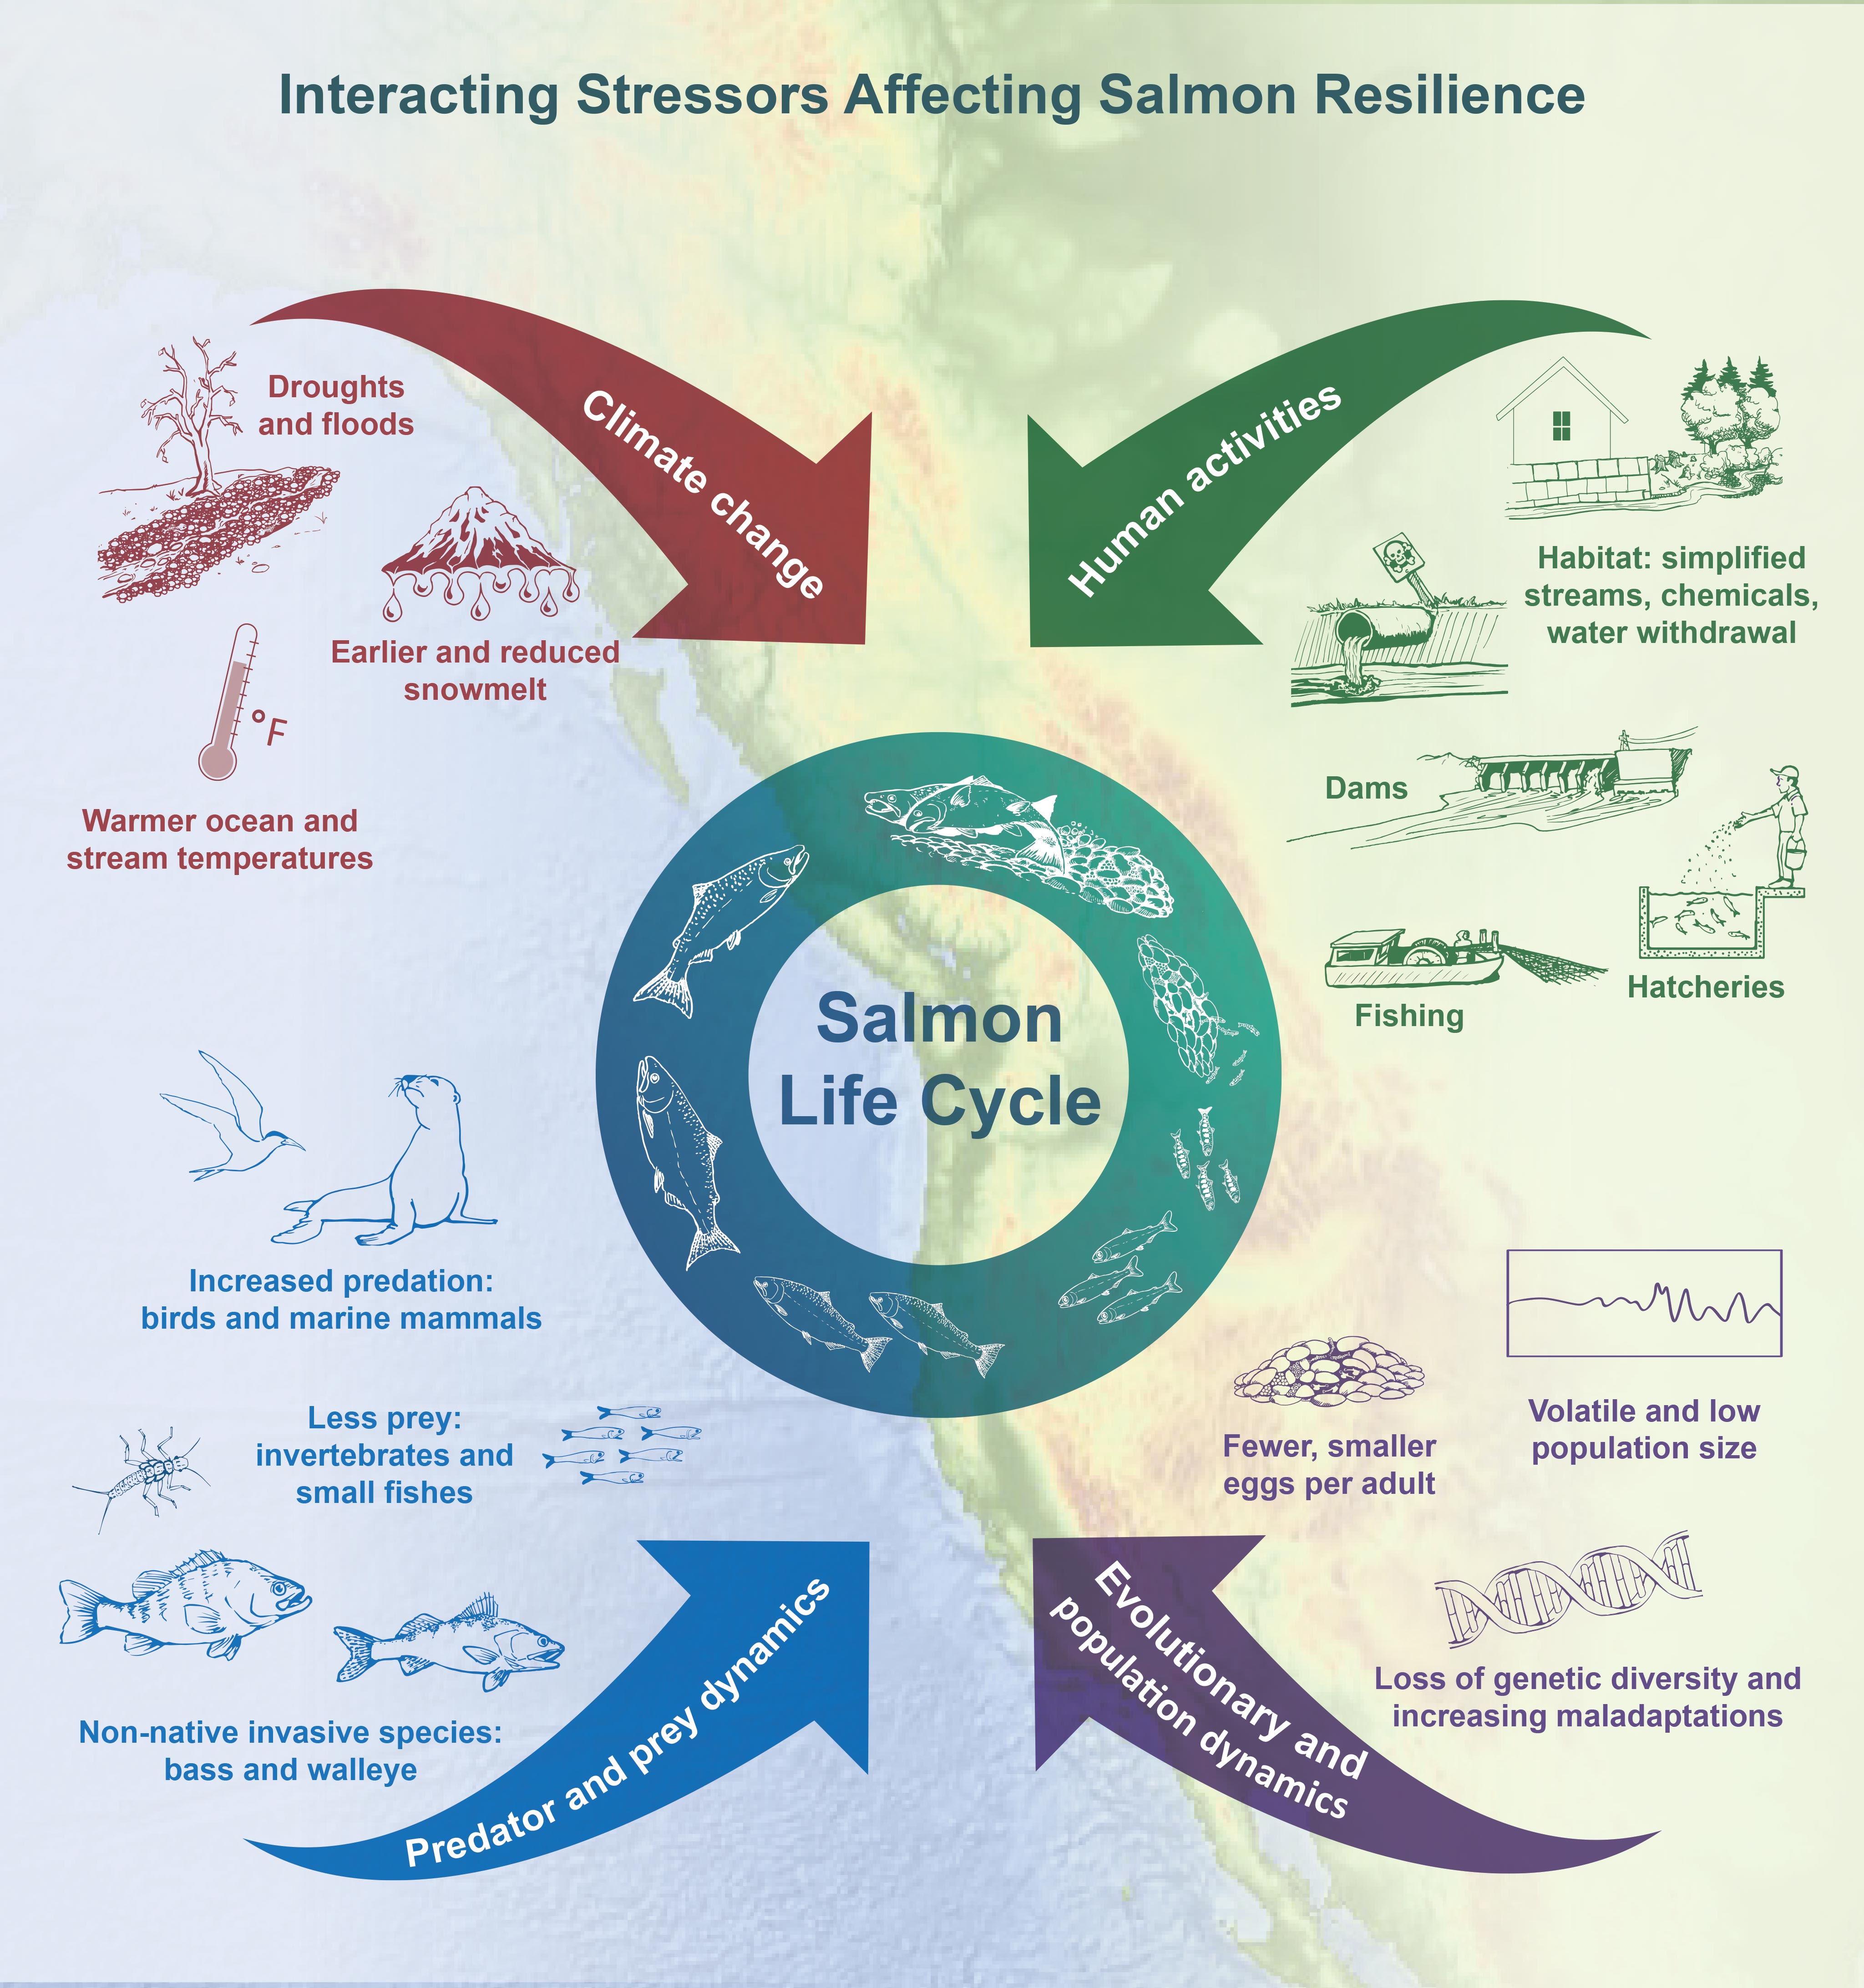 Interacting Stressors Affect Salmon Resilience